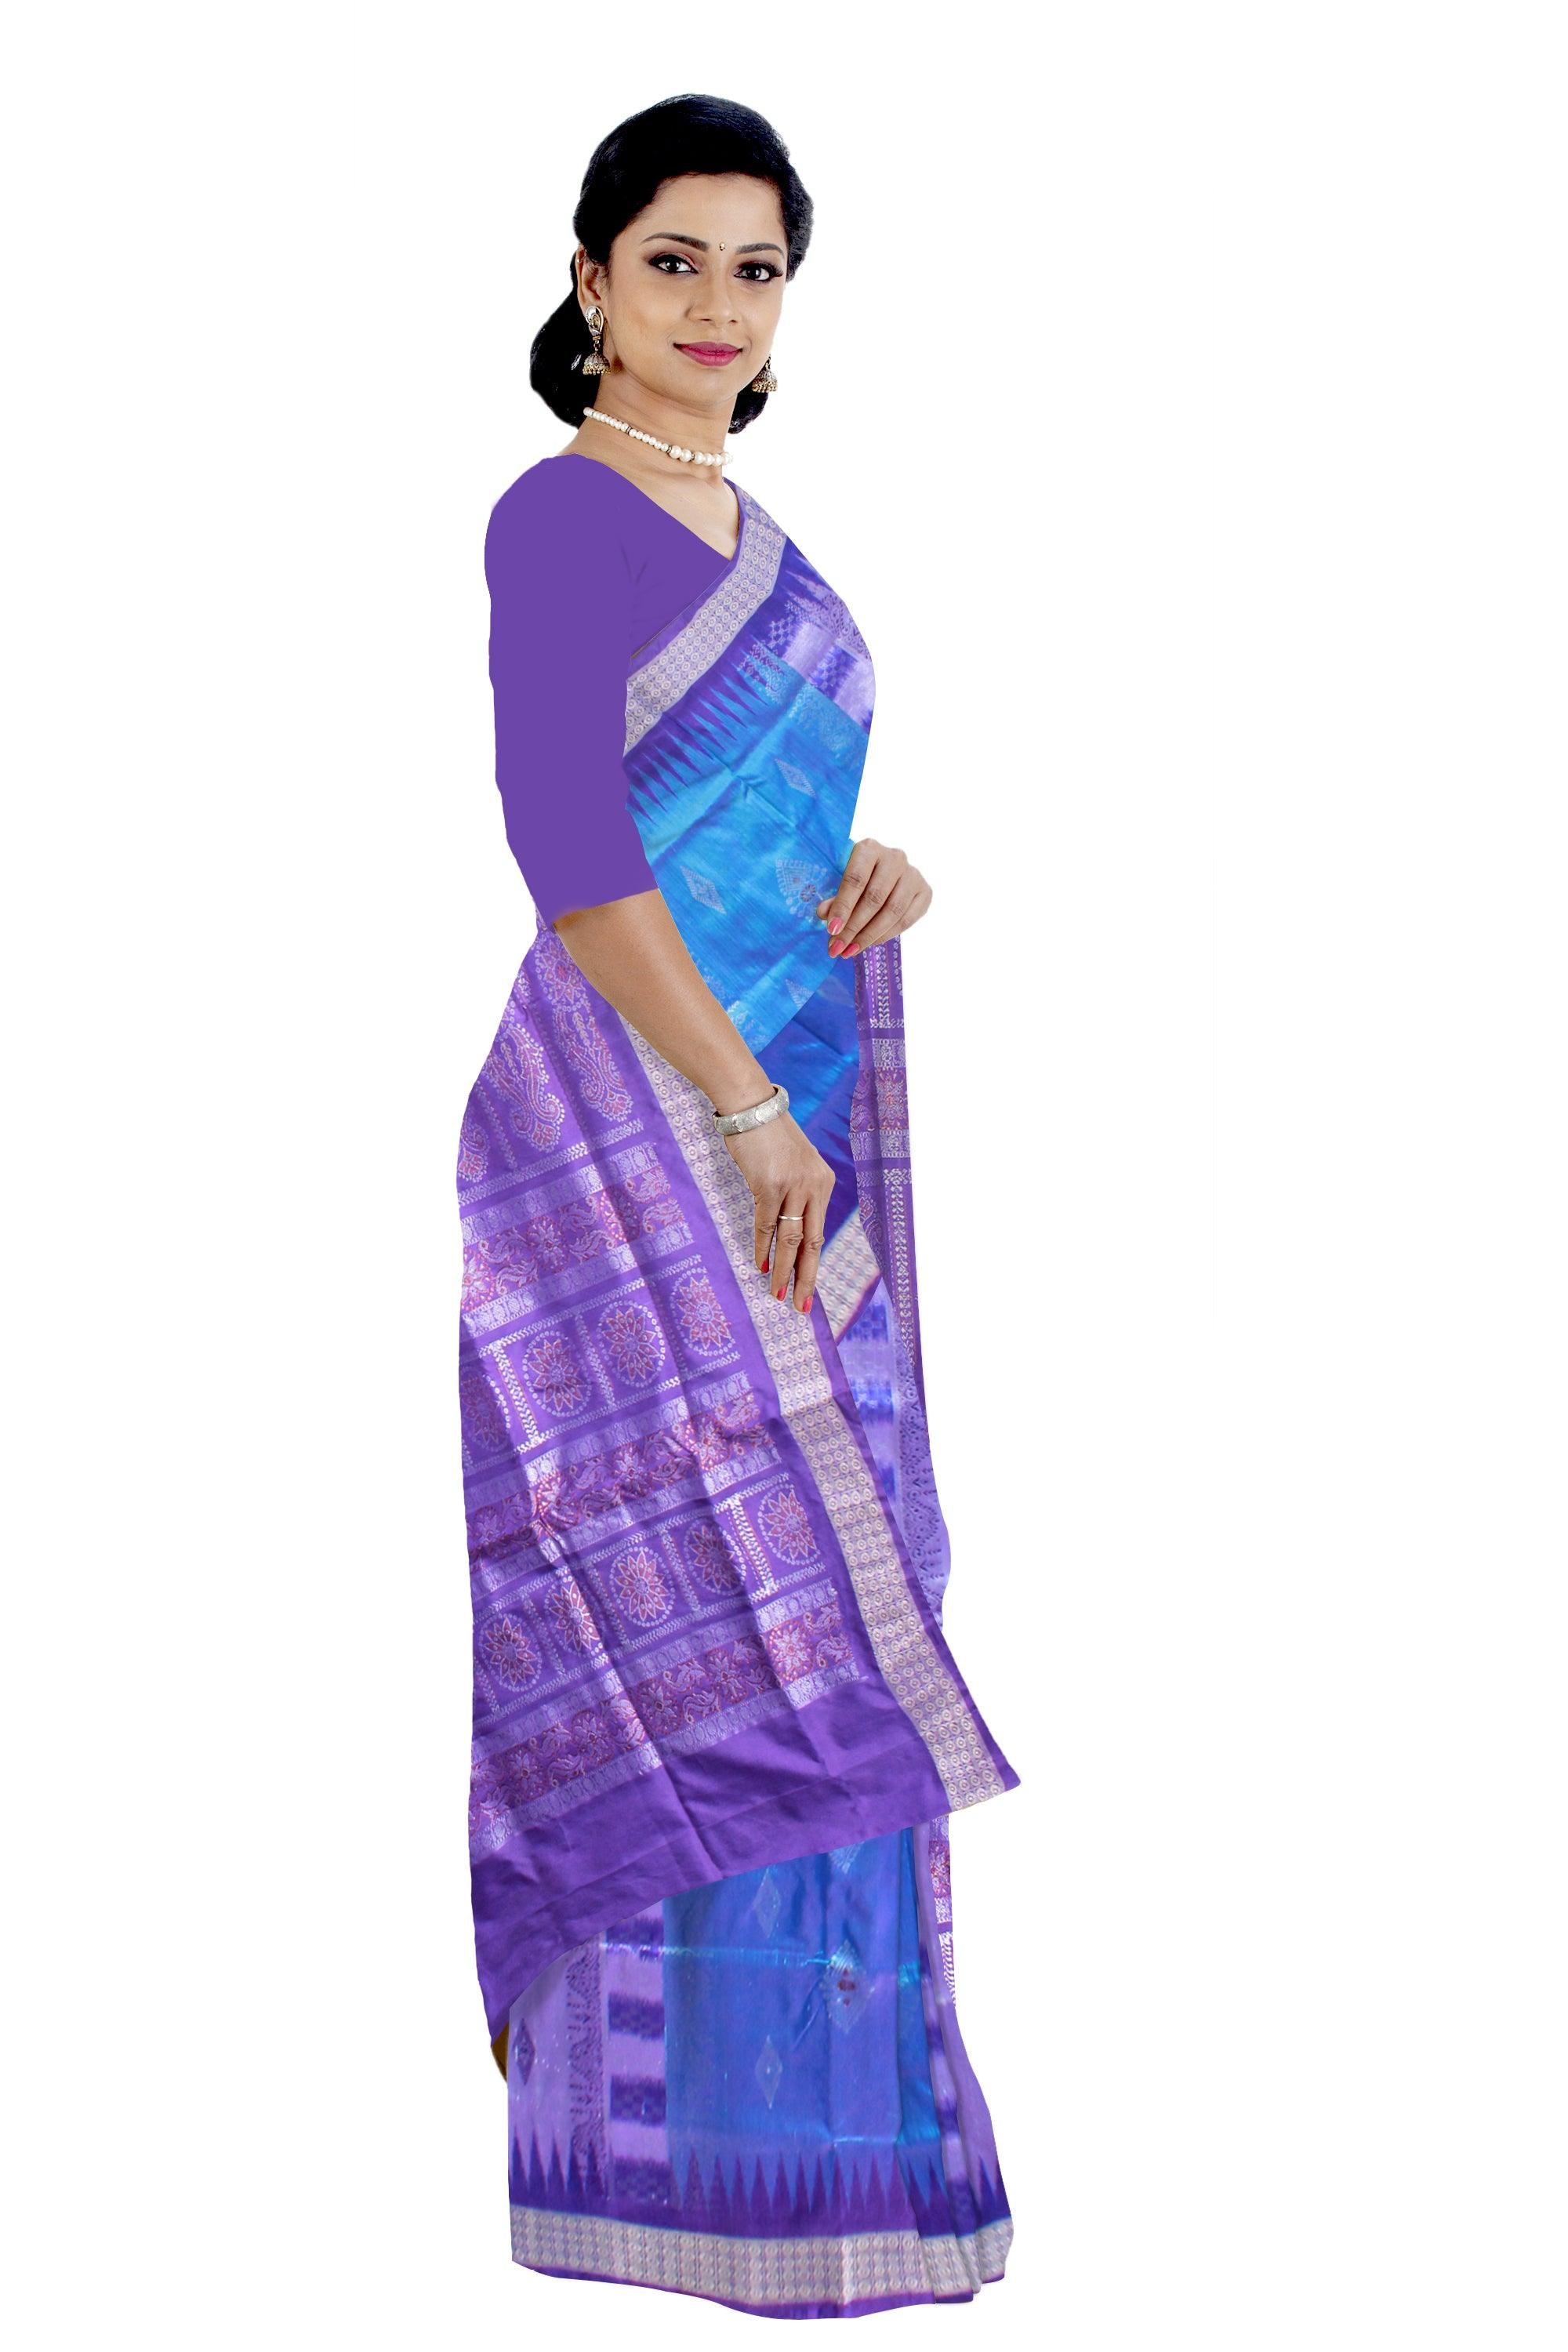 A BOMKEI PATA SAREE IS LIGHT SKY , BLUE AND SILVER COLOR  , ATTACHED WITH SKY BLOUSE PIECE. - Koshali Arts & Crafts Enterprise